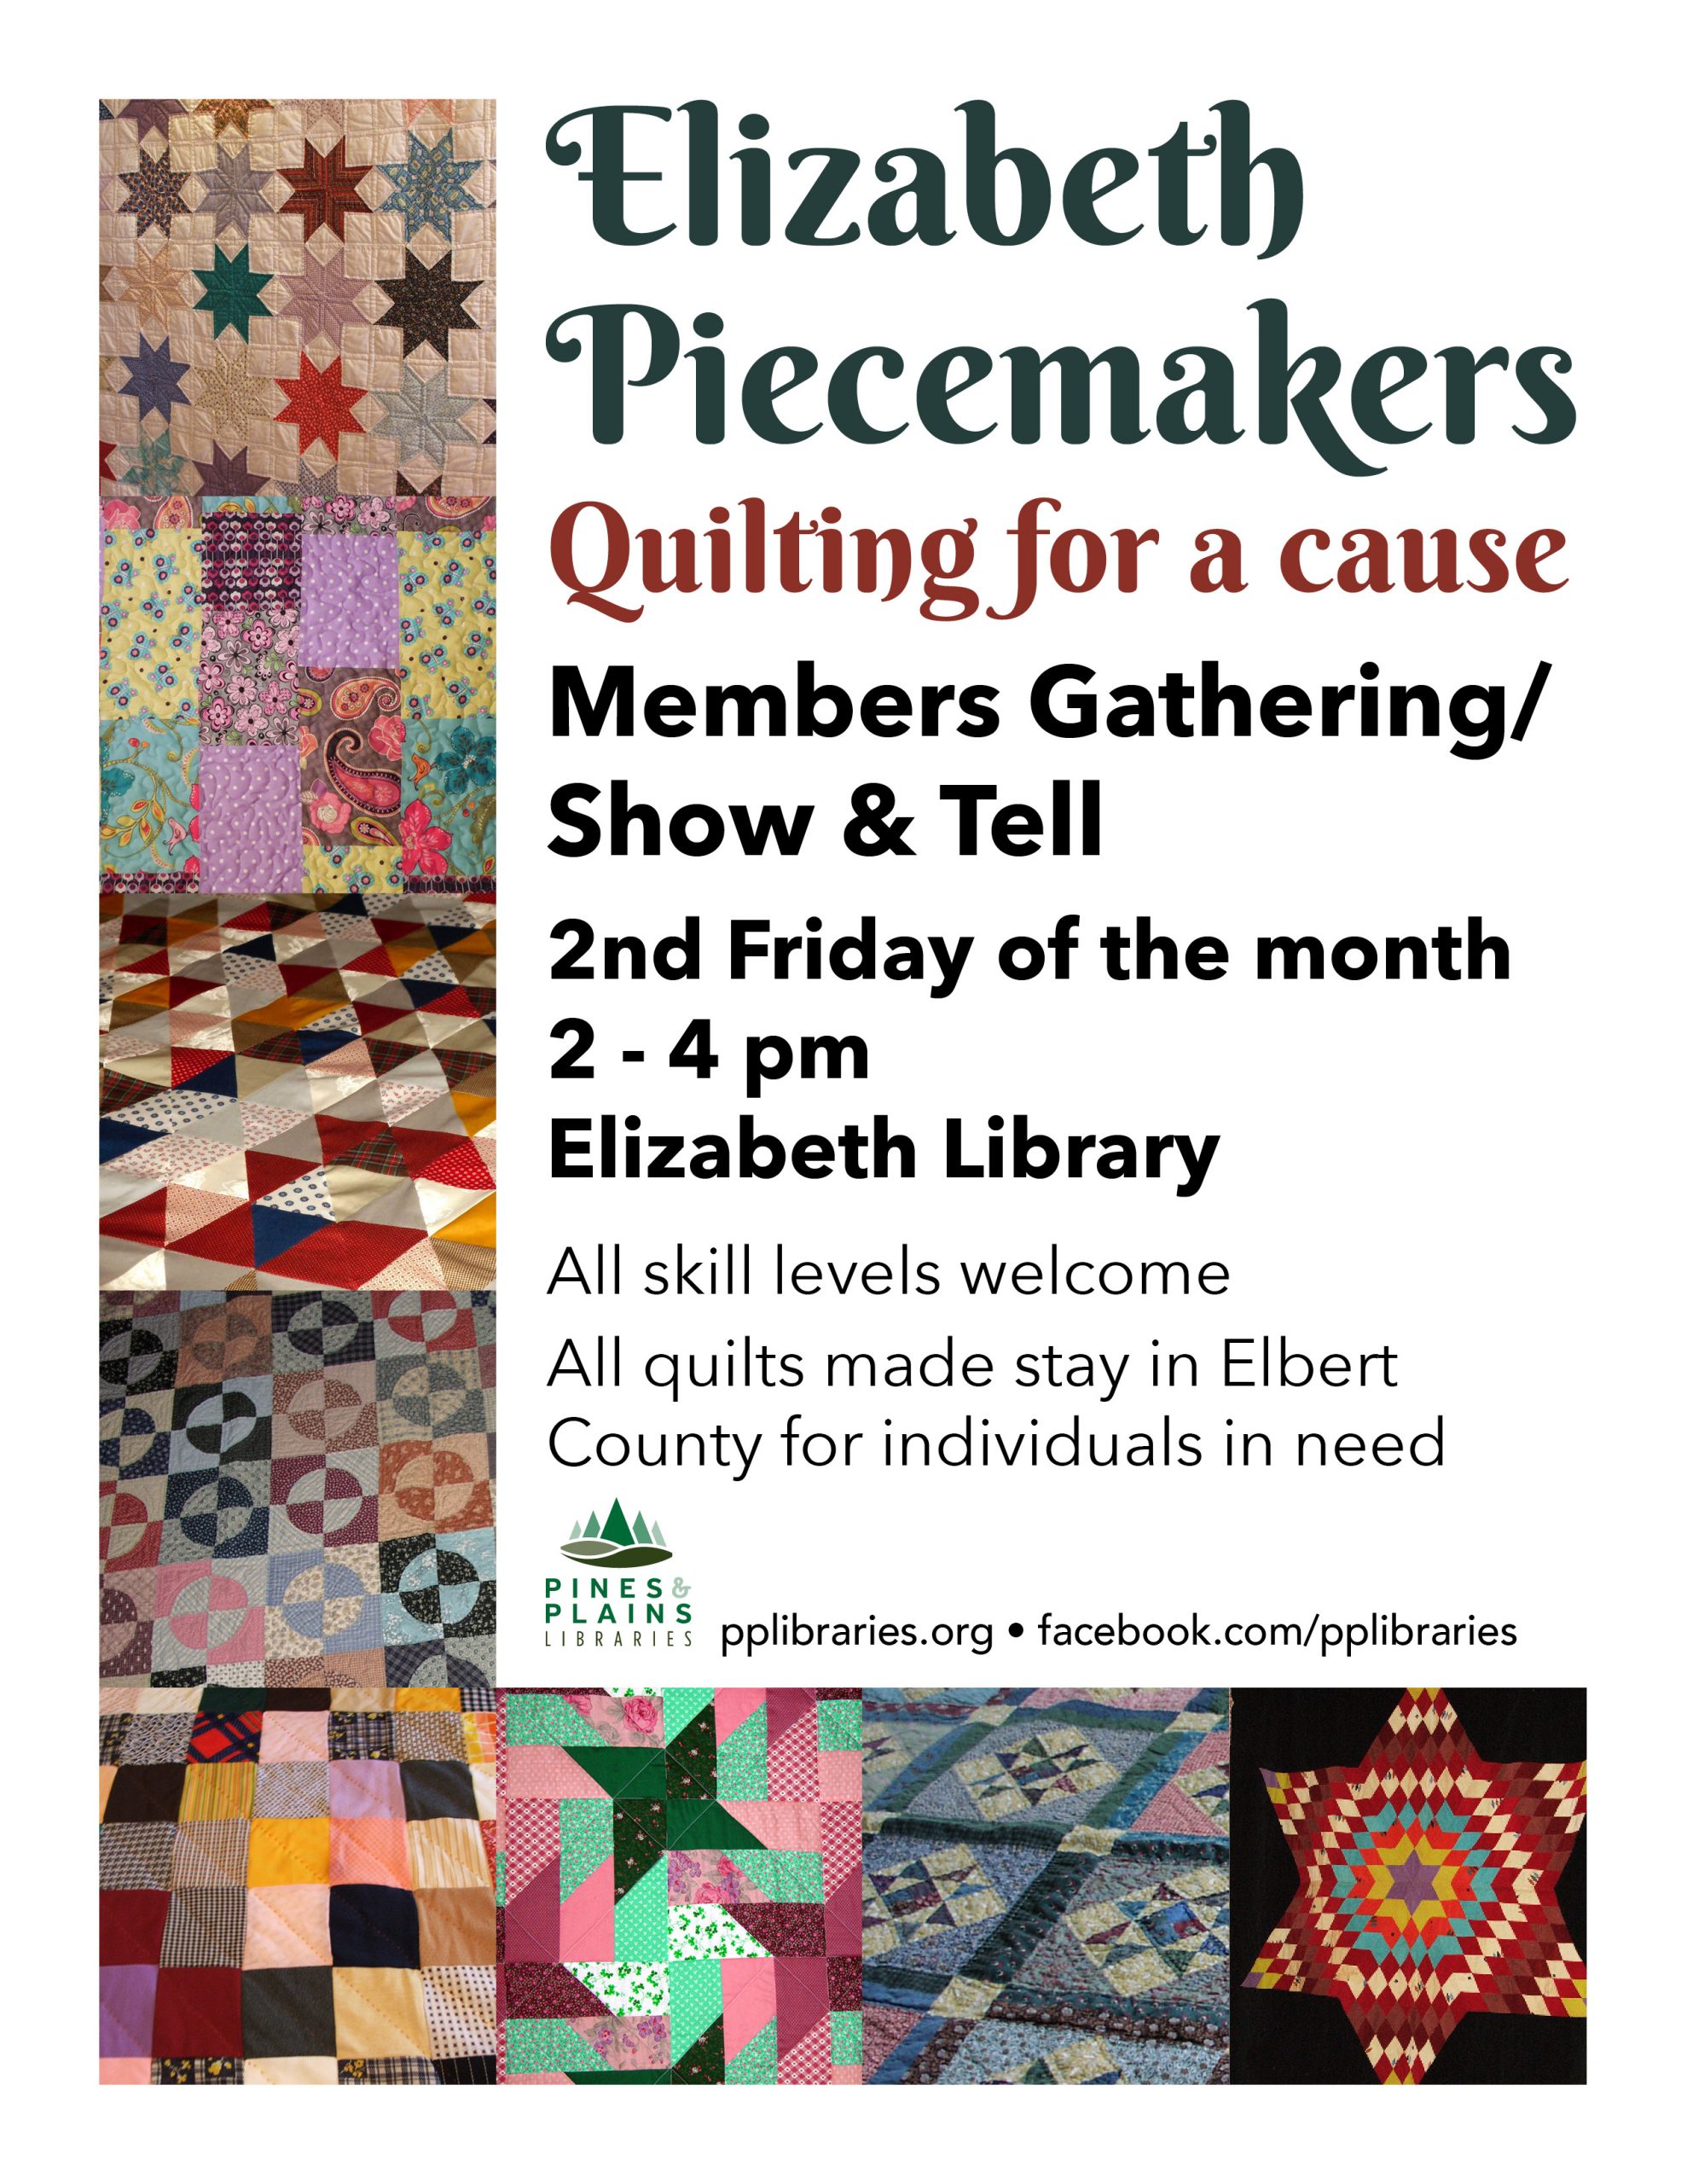 Elizabeth Piecemakers flyer with images of quilts